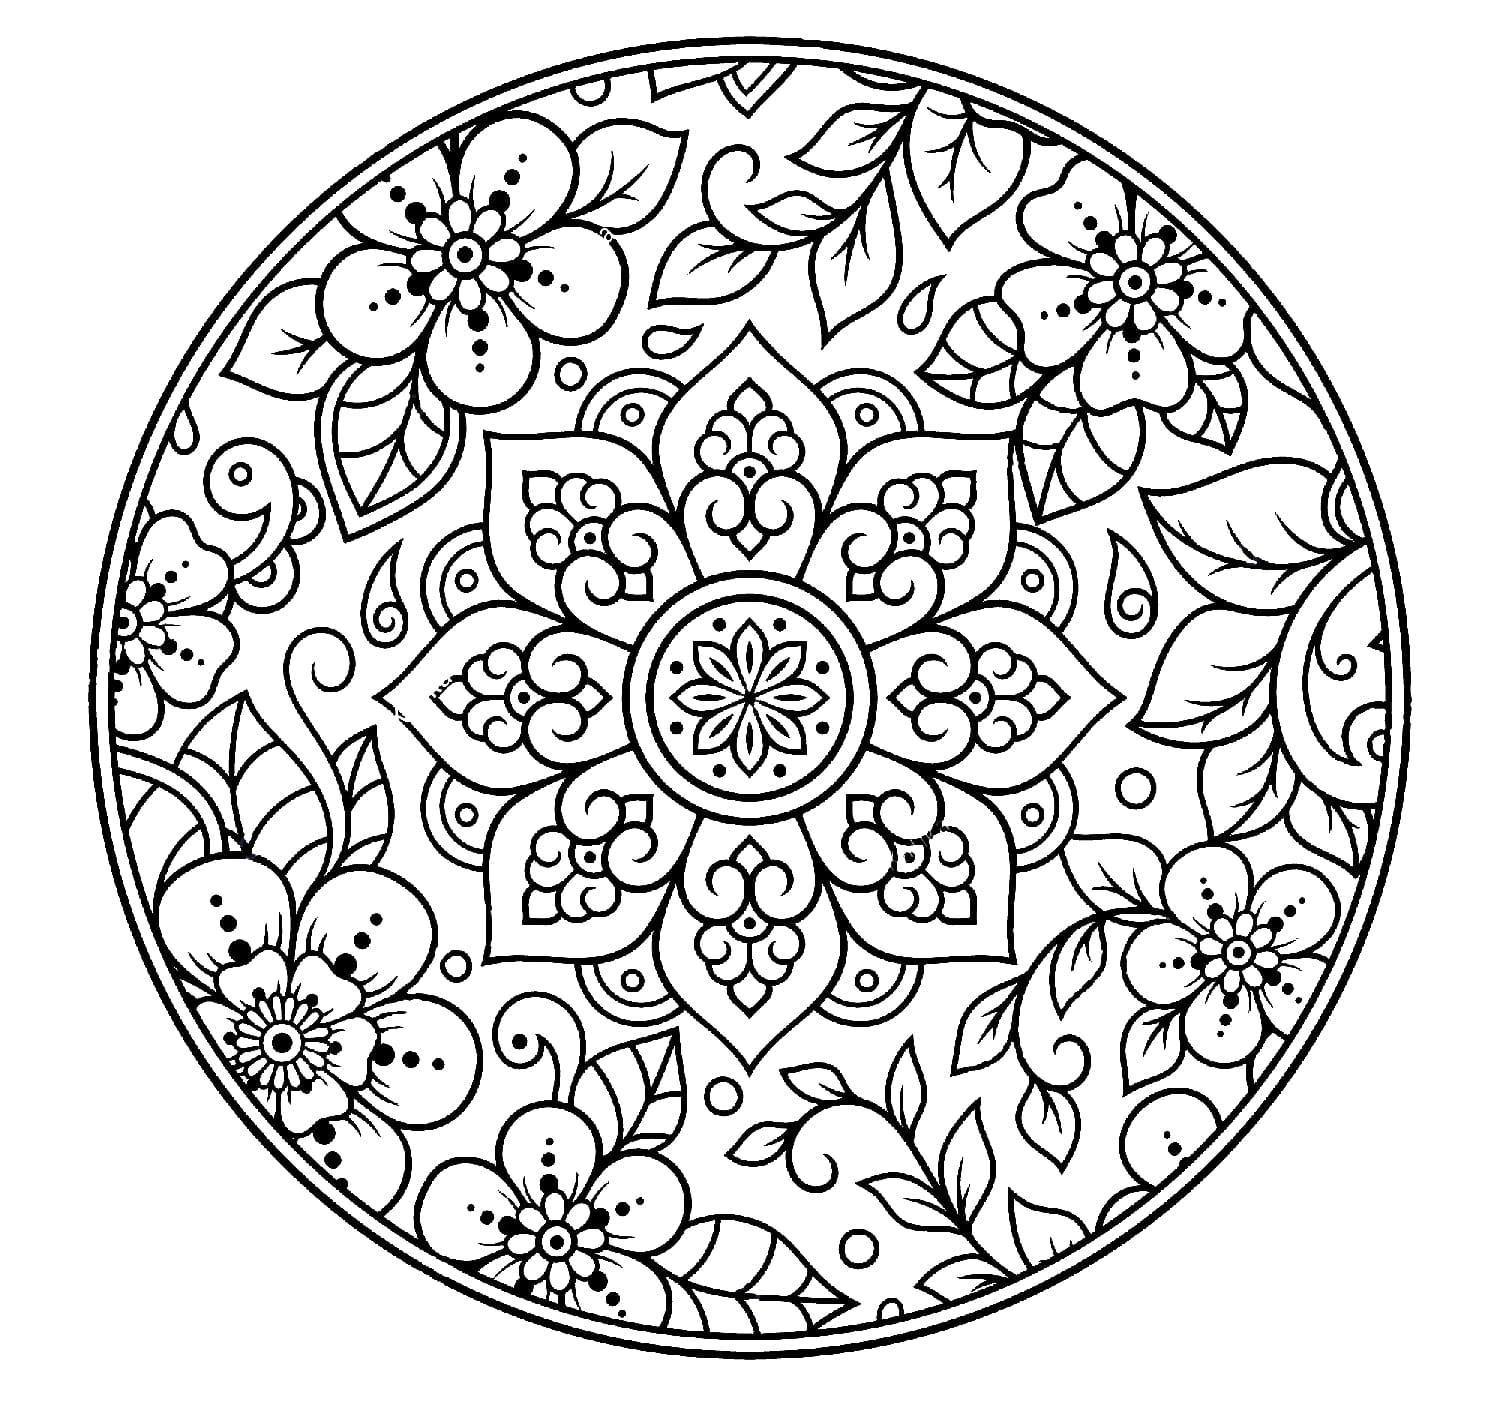 Flowers Mandala Coloring Pages - Coloring Pages for Adults